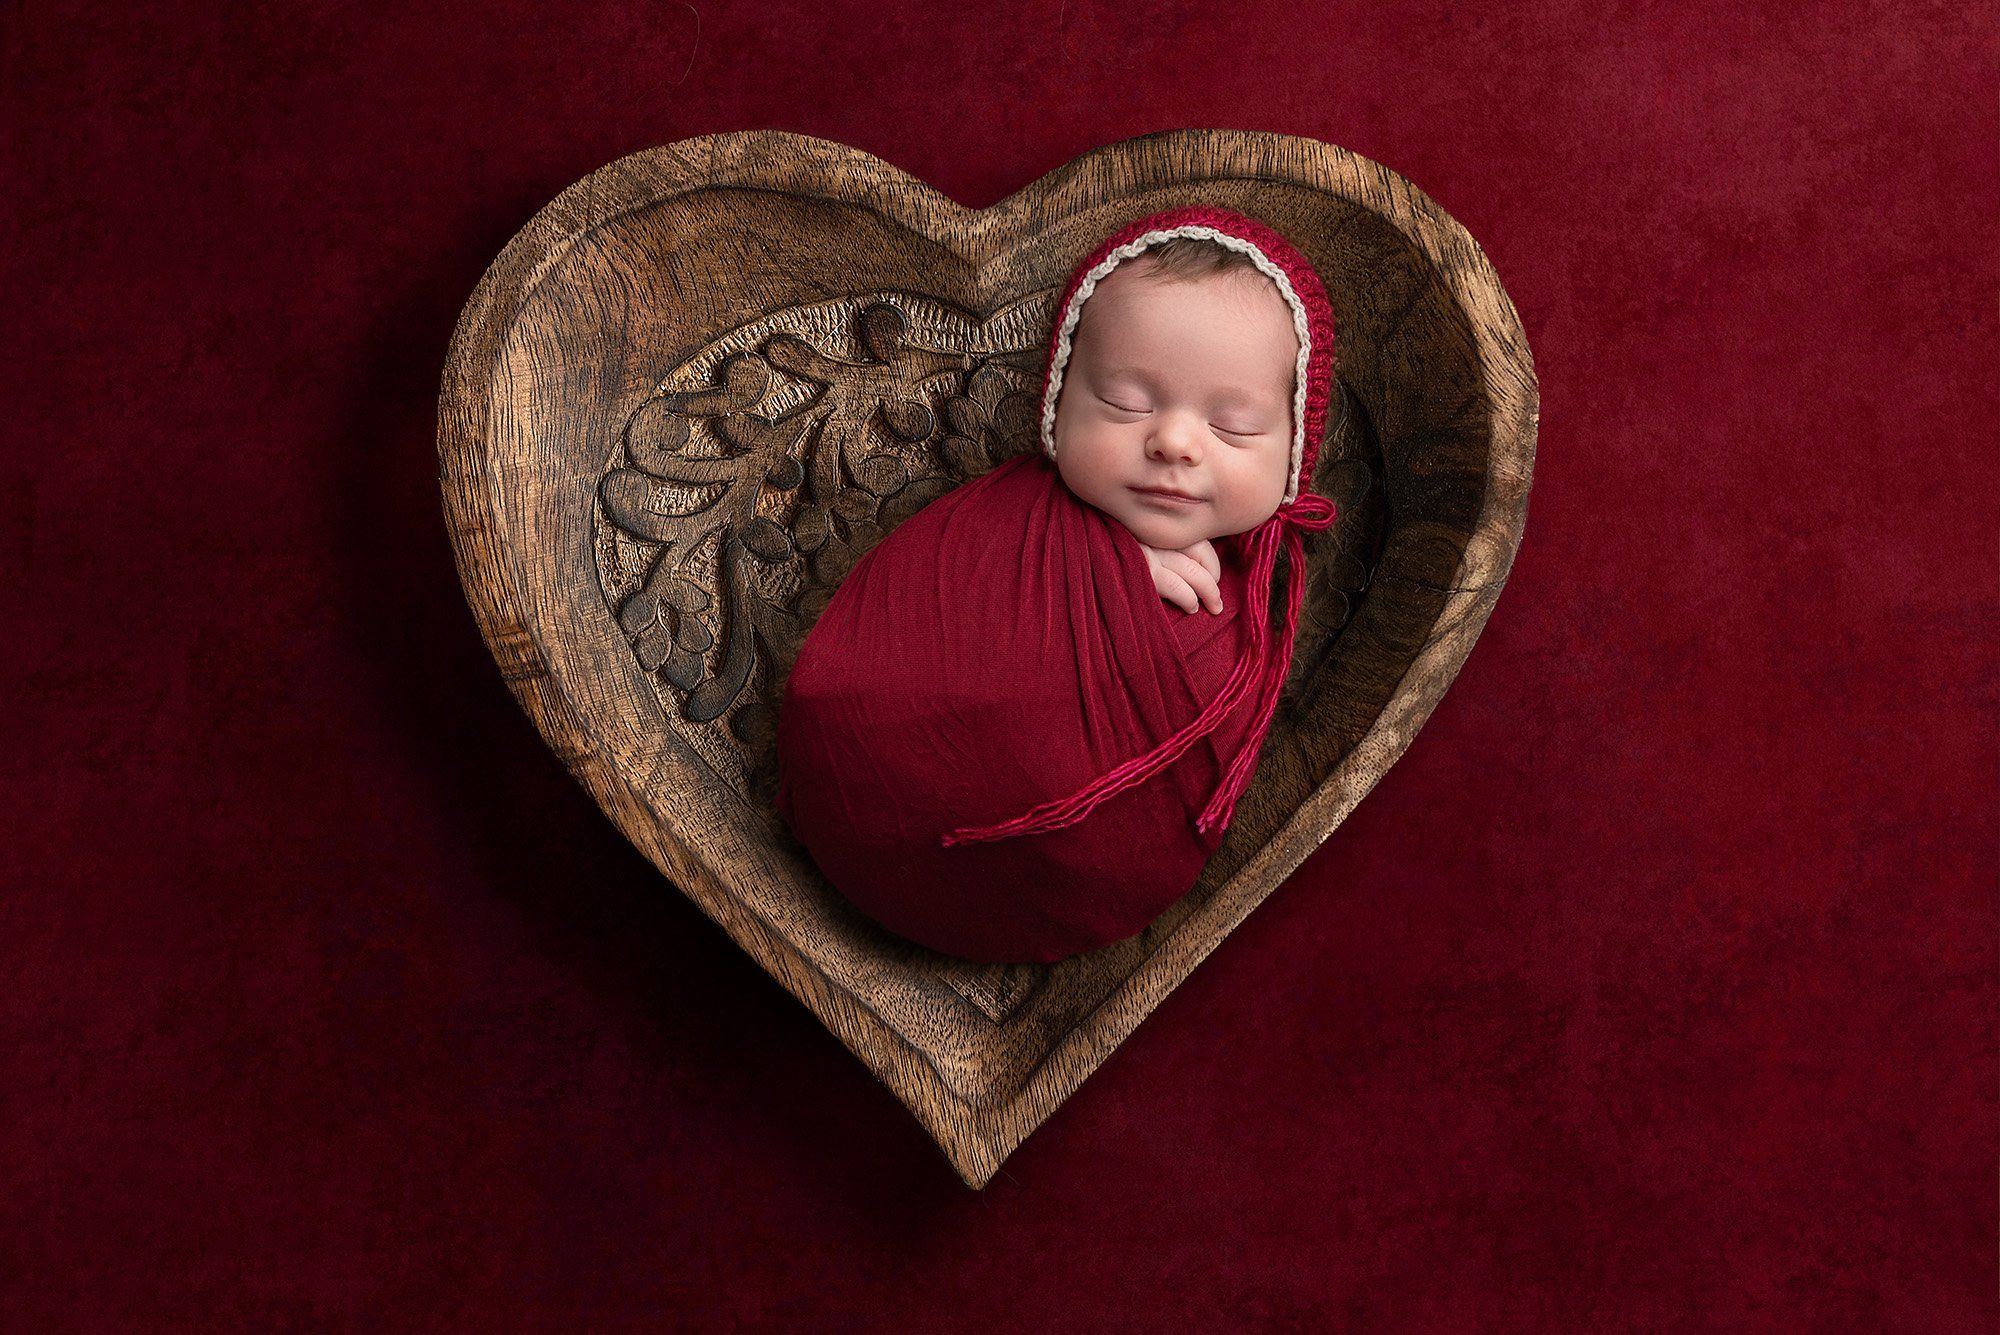 newborn baby girl sleeping wearing red bonnet swaddle laying in wooden heart box on red background